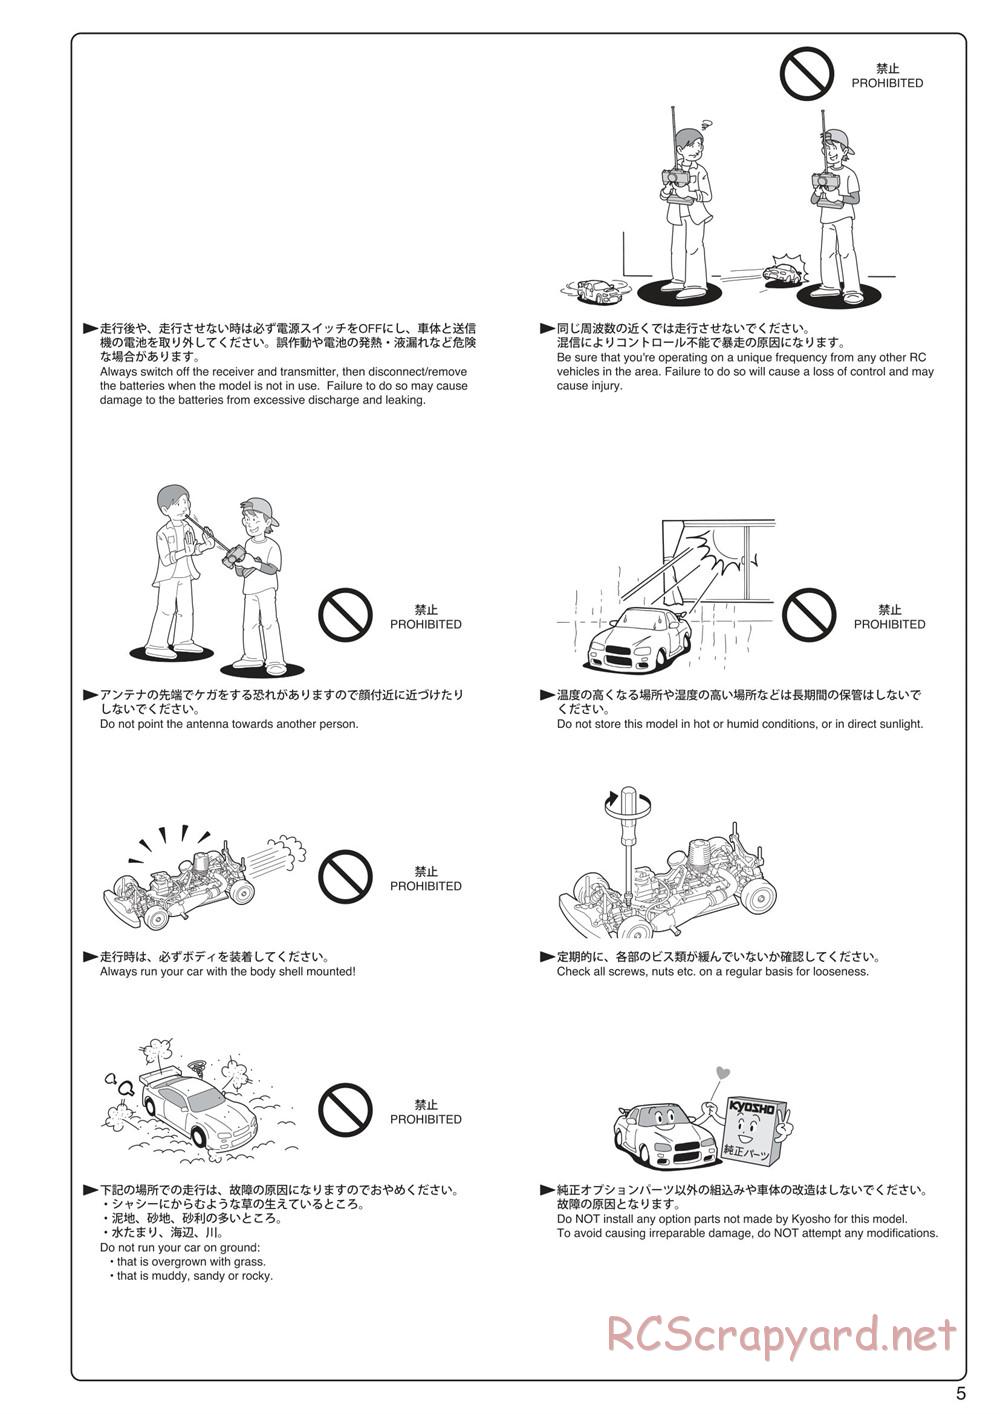 Kyosho - Ultima RB6 - Manual - Page 5